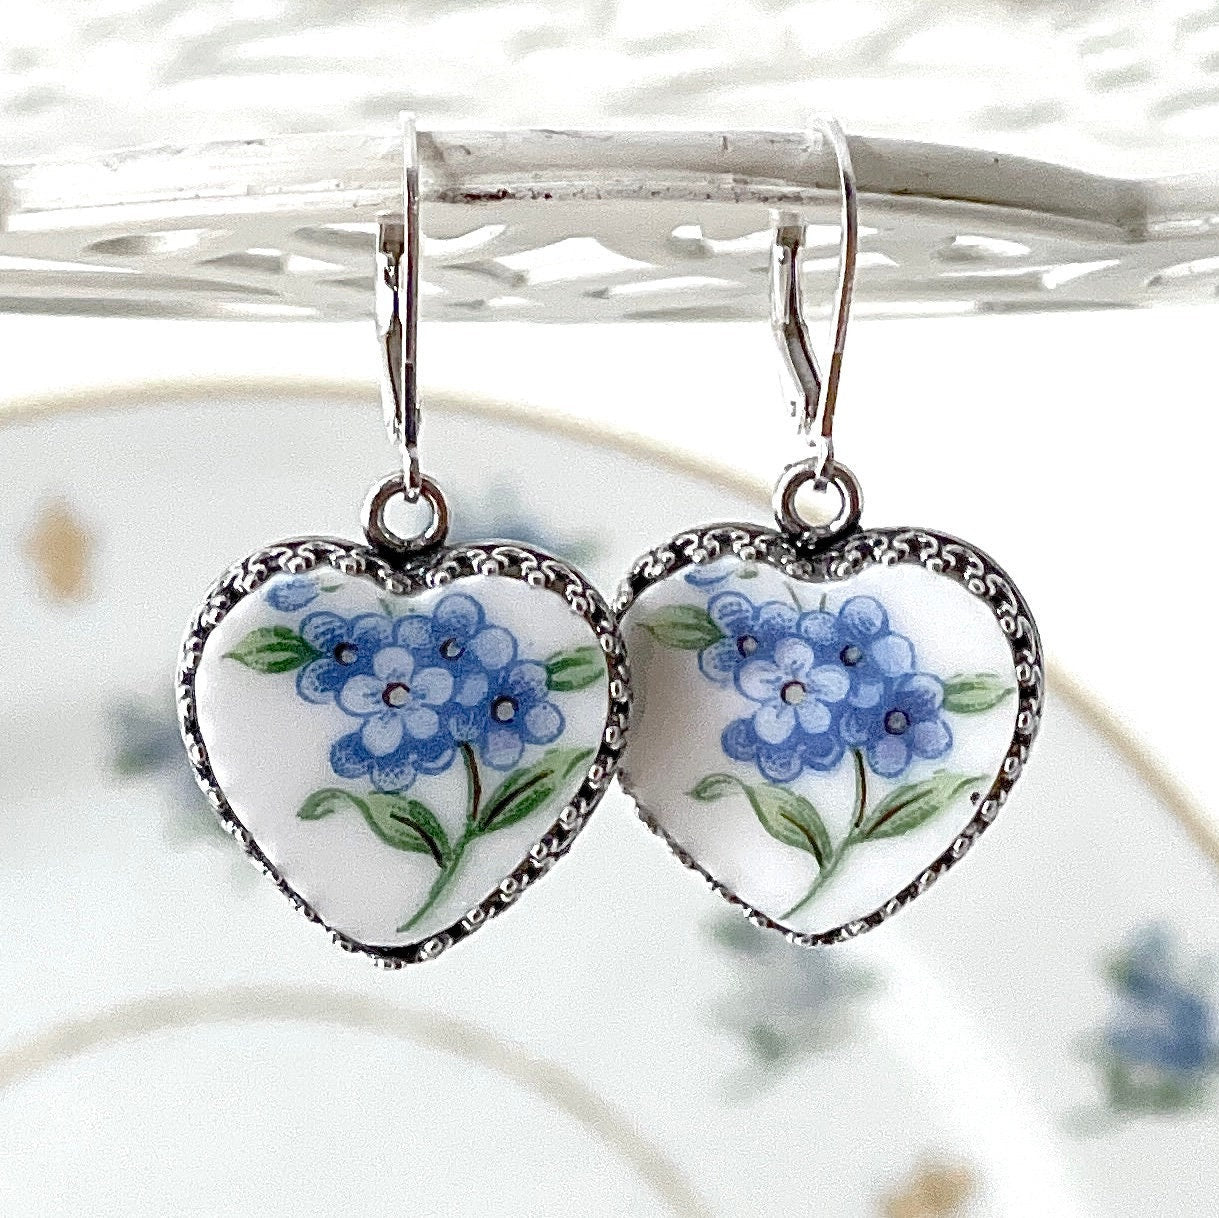 Forget Me Not China Earrings, 20th Anniversary Gift for Wife,  Blue Broken China Jewelry, Heart Forget Me Not Earrings, Jewelry Gifts